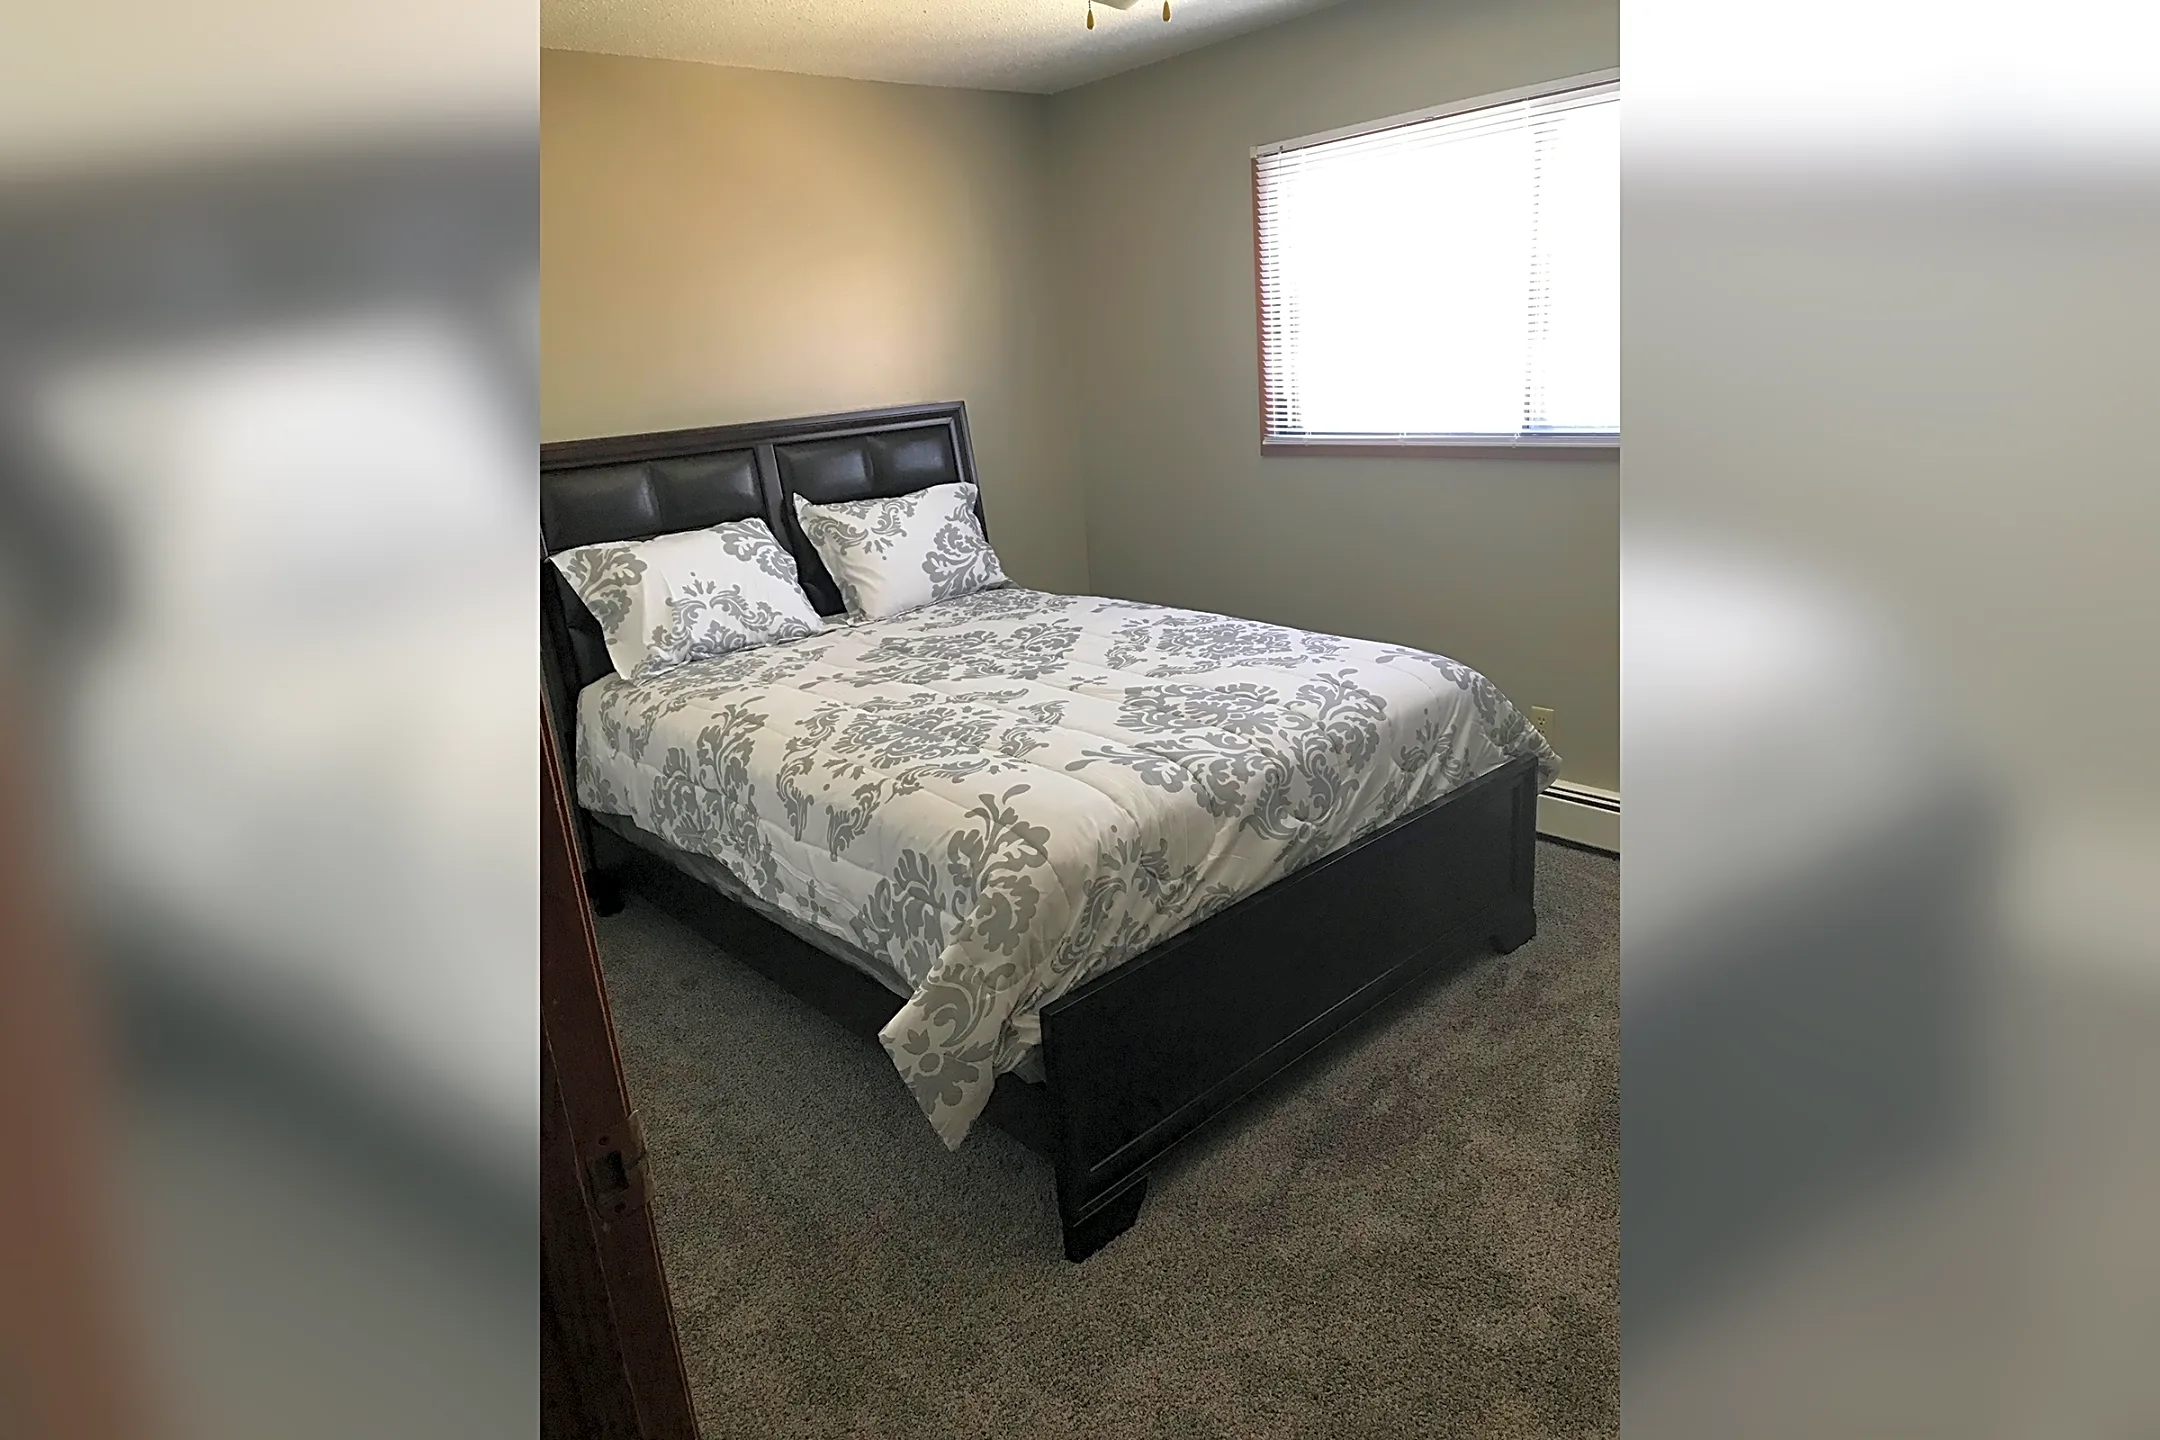 Bedroom - Taylor's Place - Sioux Falls, SD